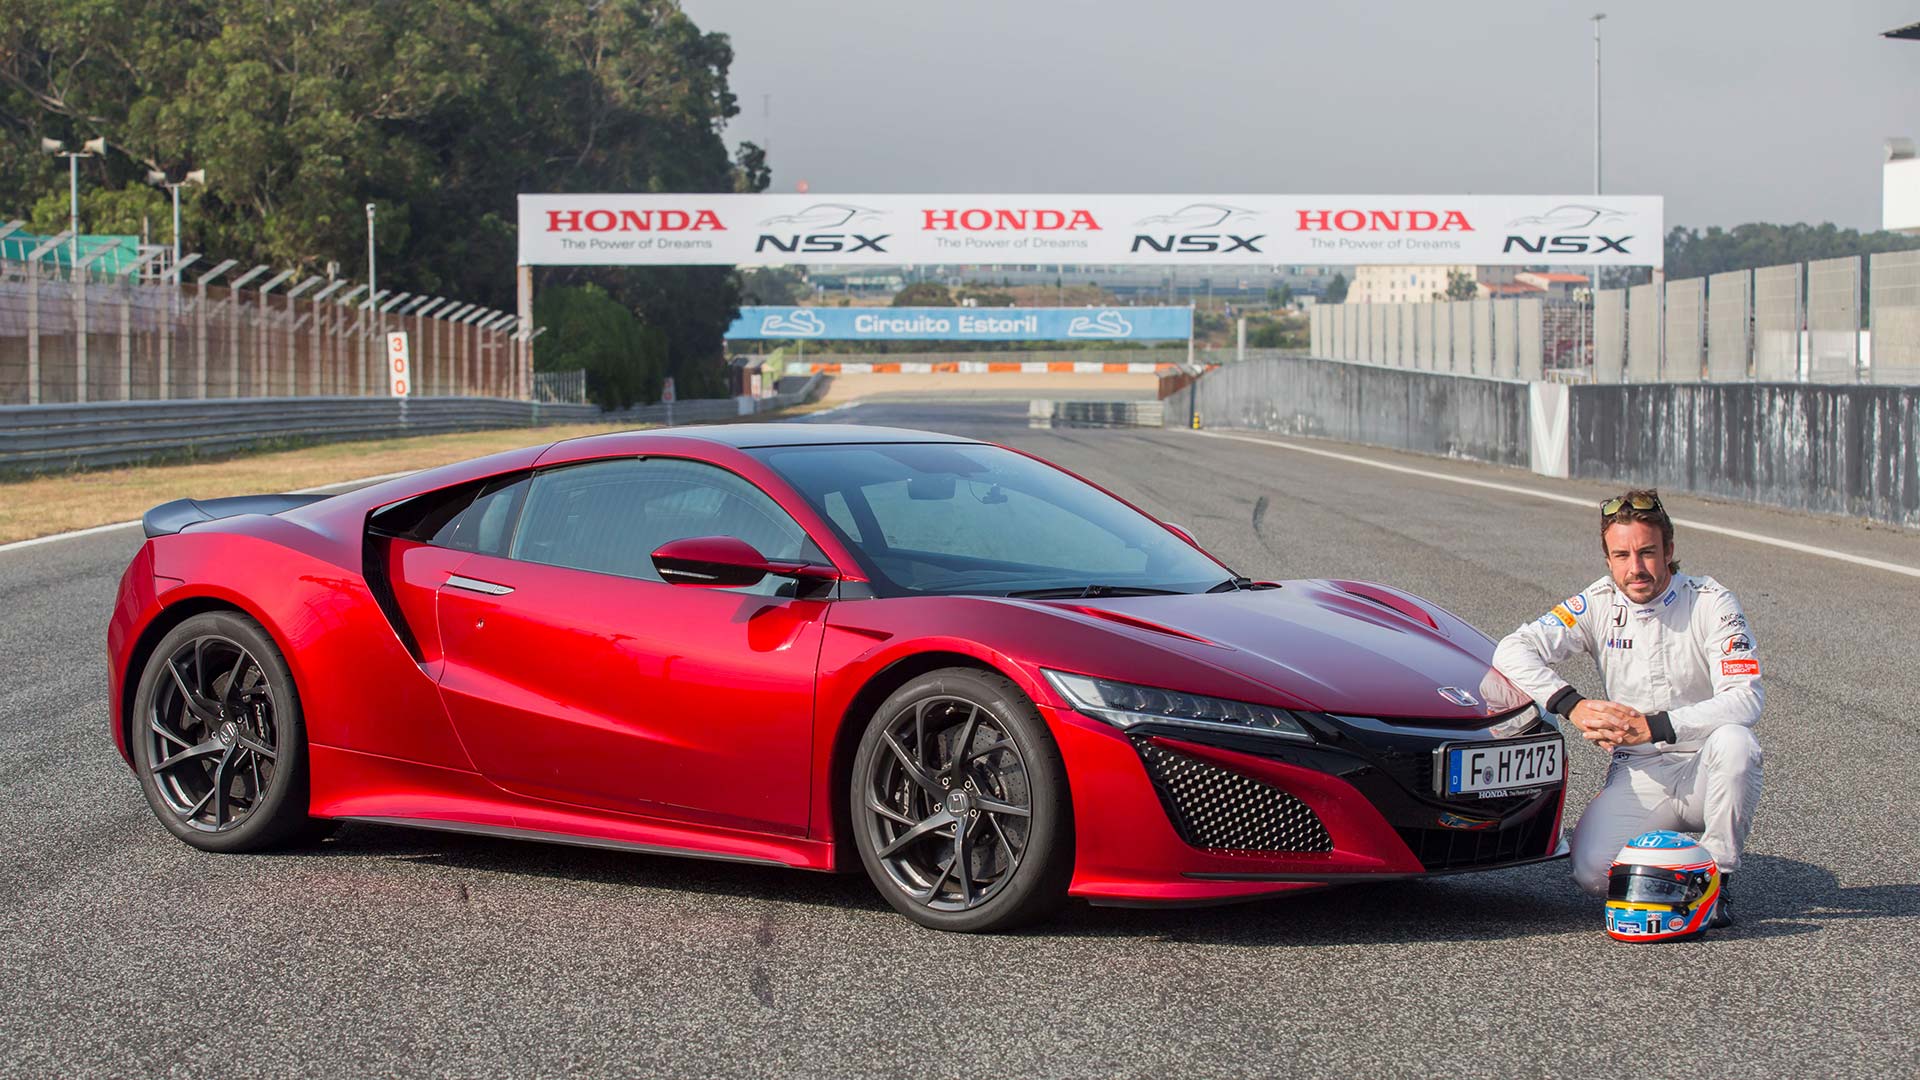 Fernando Alonso tests the new NSX